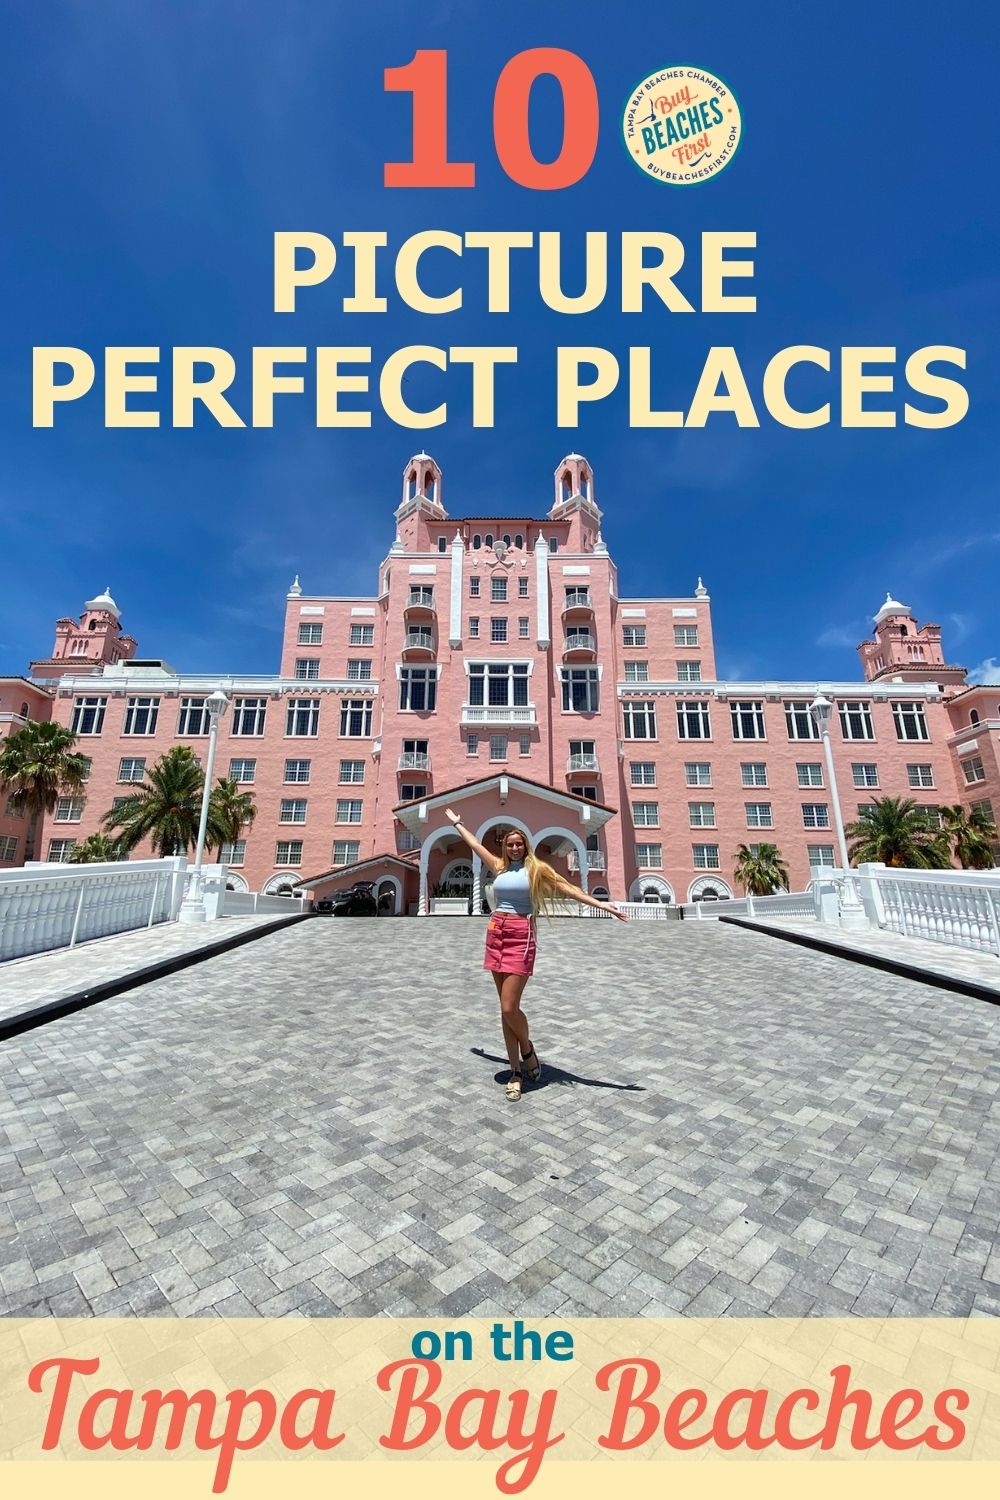 Image for 10 Picture Perfect spots on the Tampa Bay Beaches